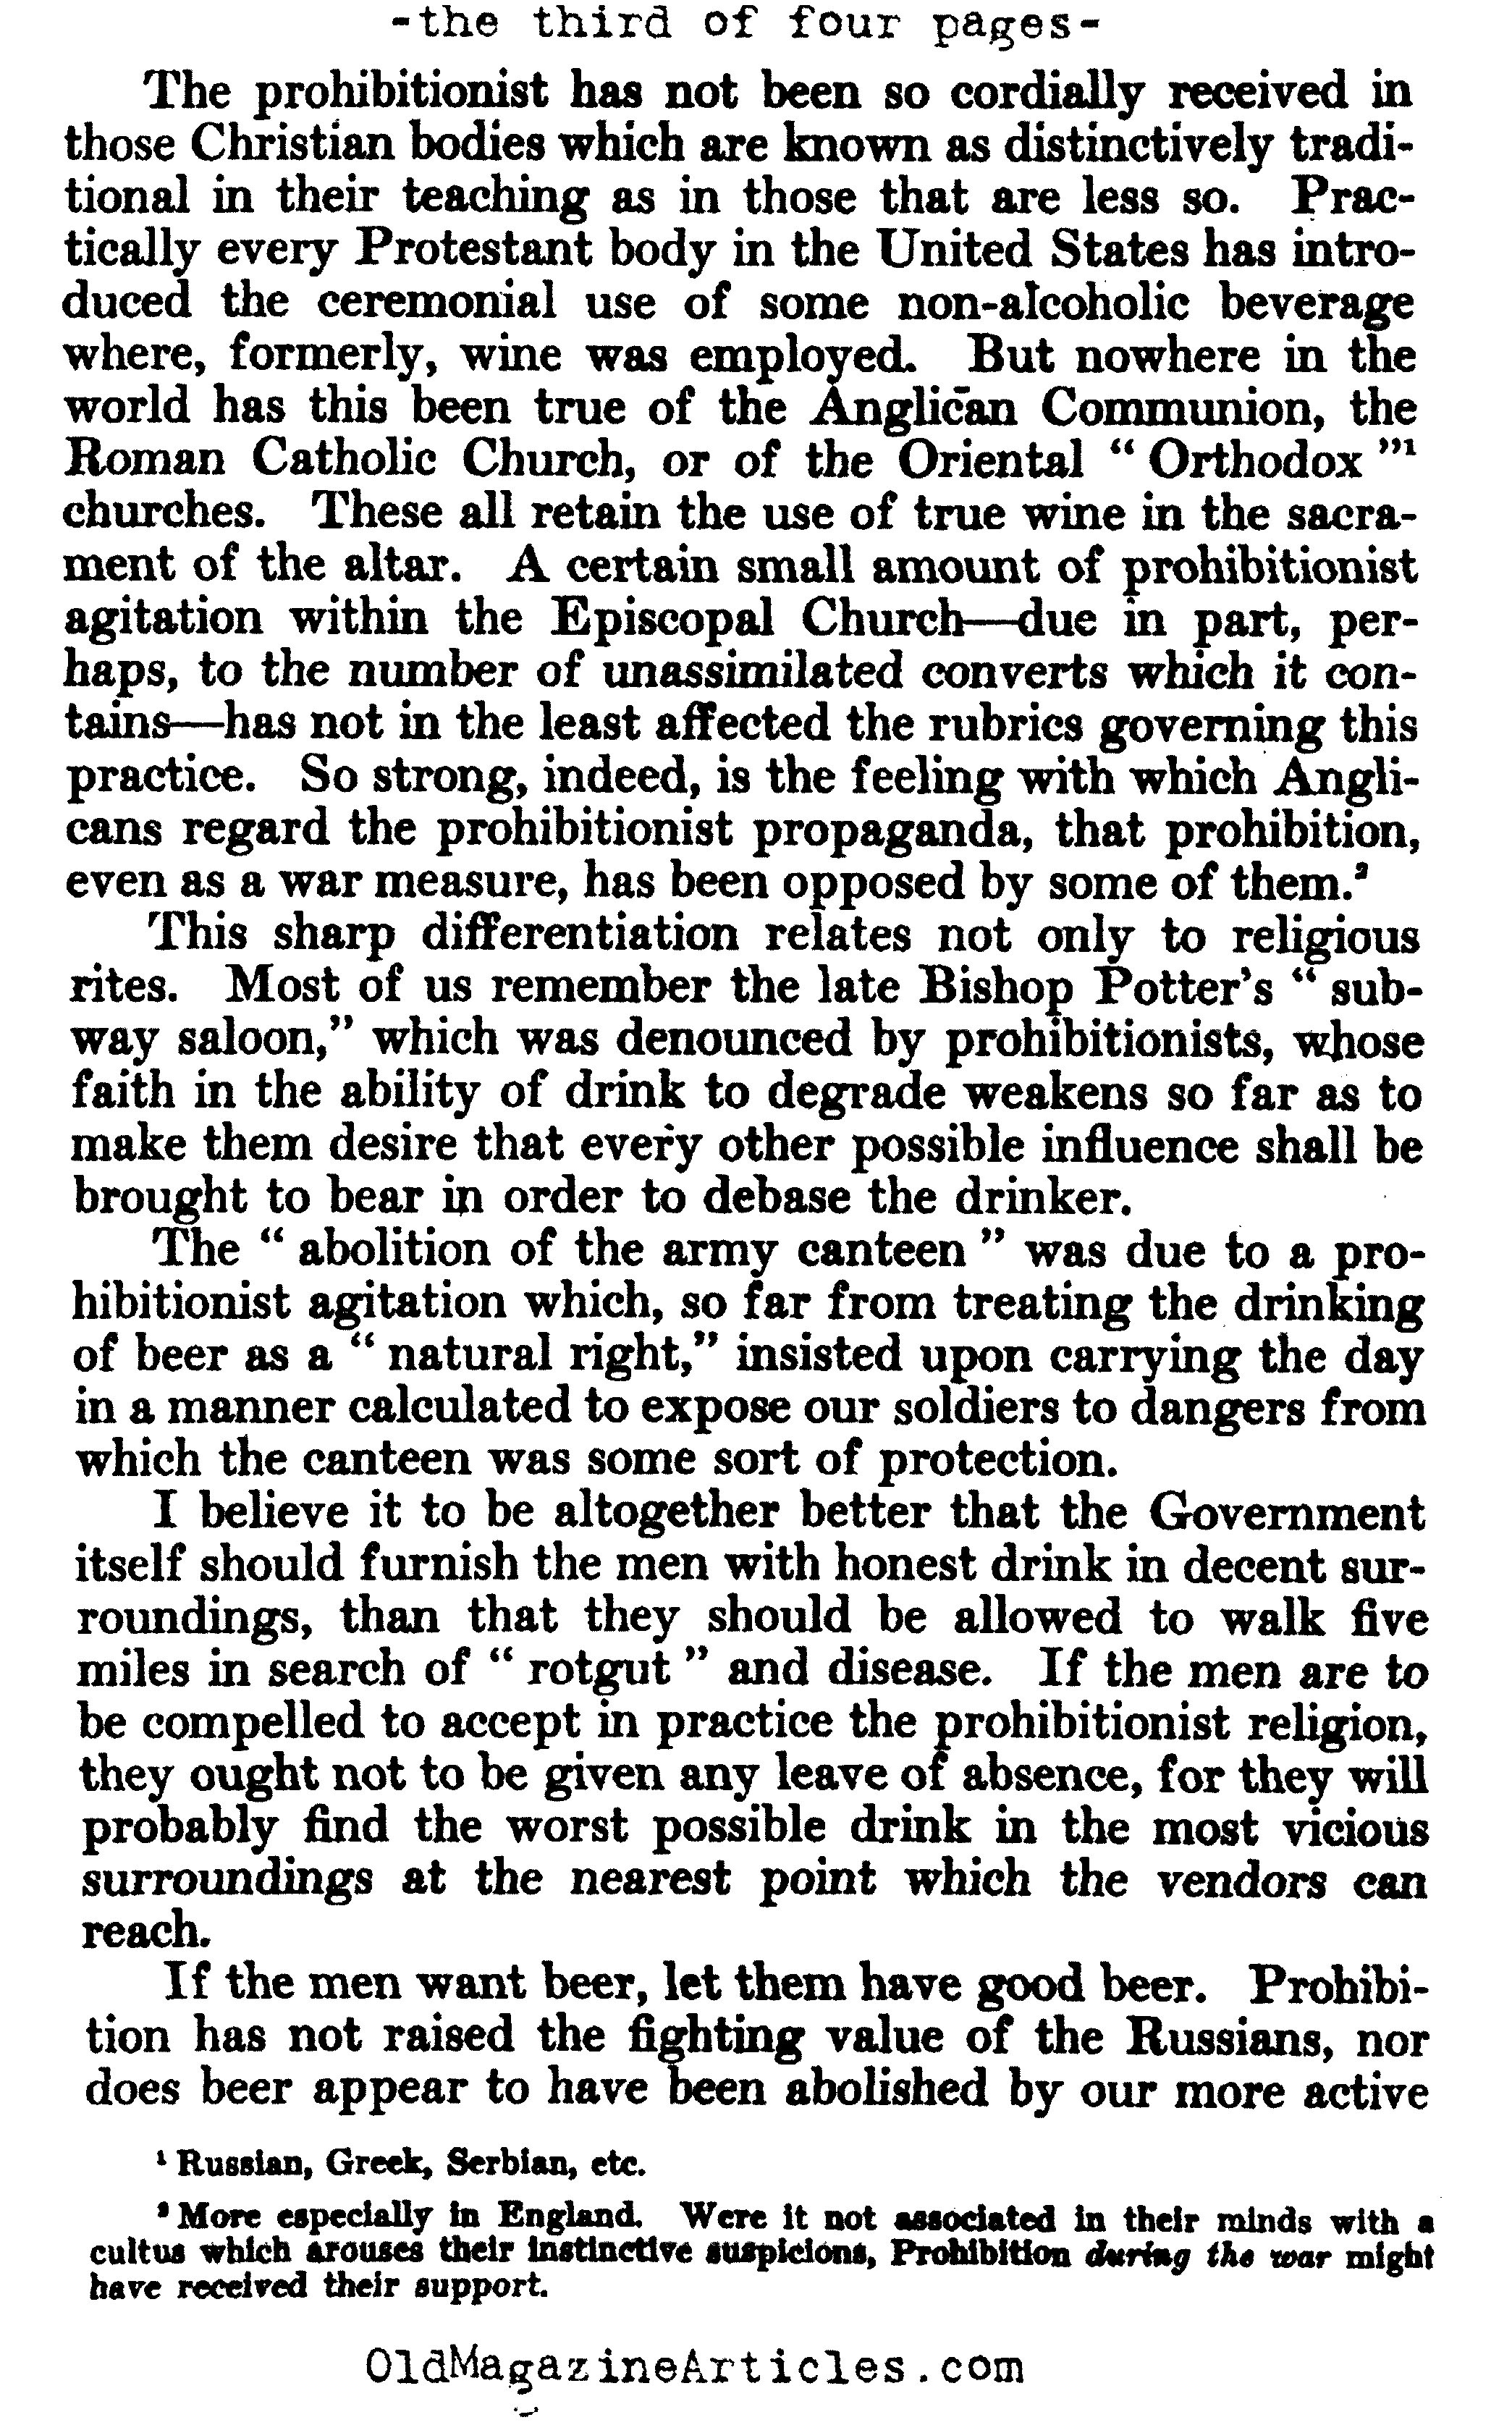 Christianity vs. Prohibition  (The North American Review, 1918)